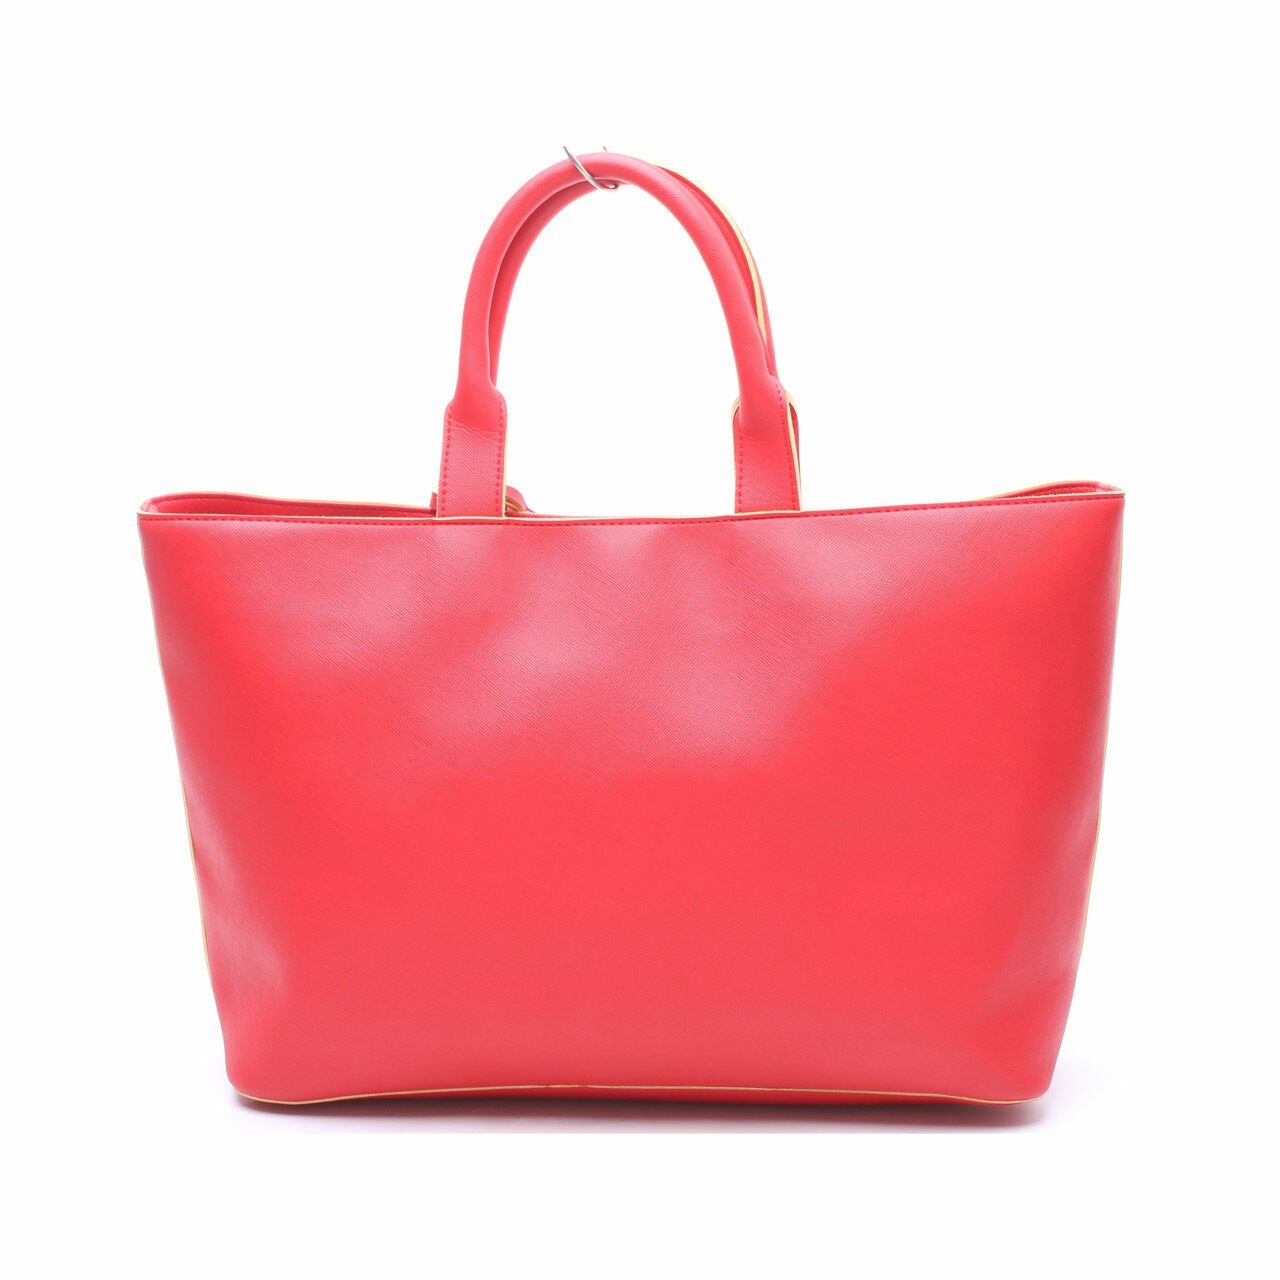 Armani Jeans Red Tote Bag